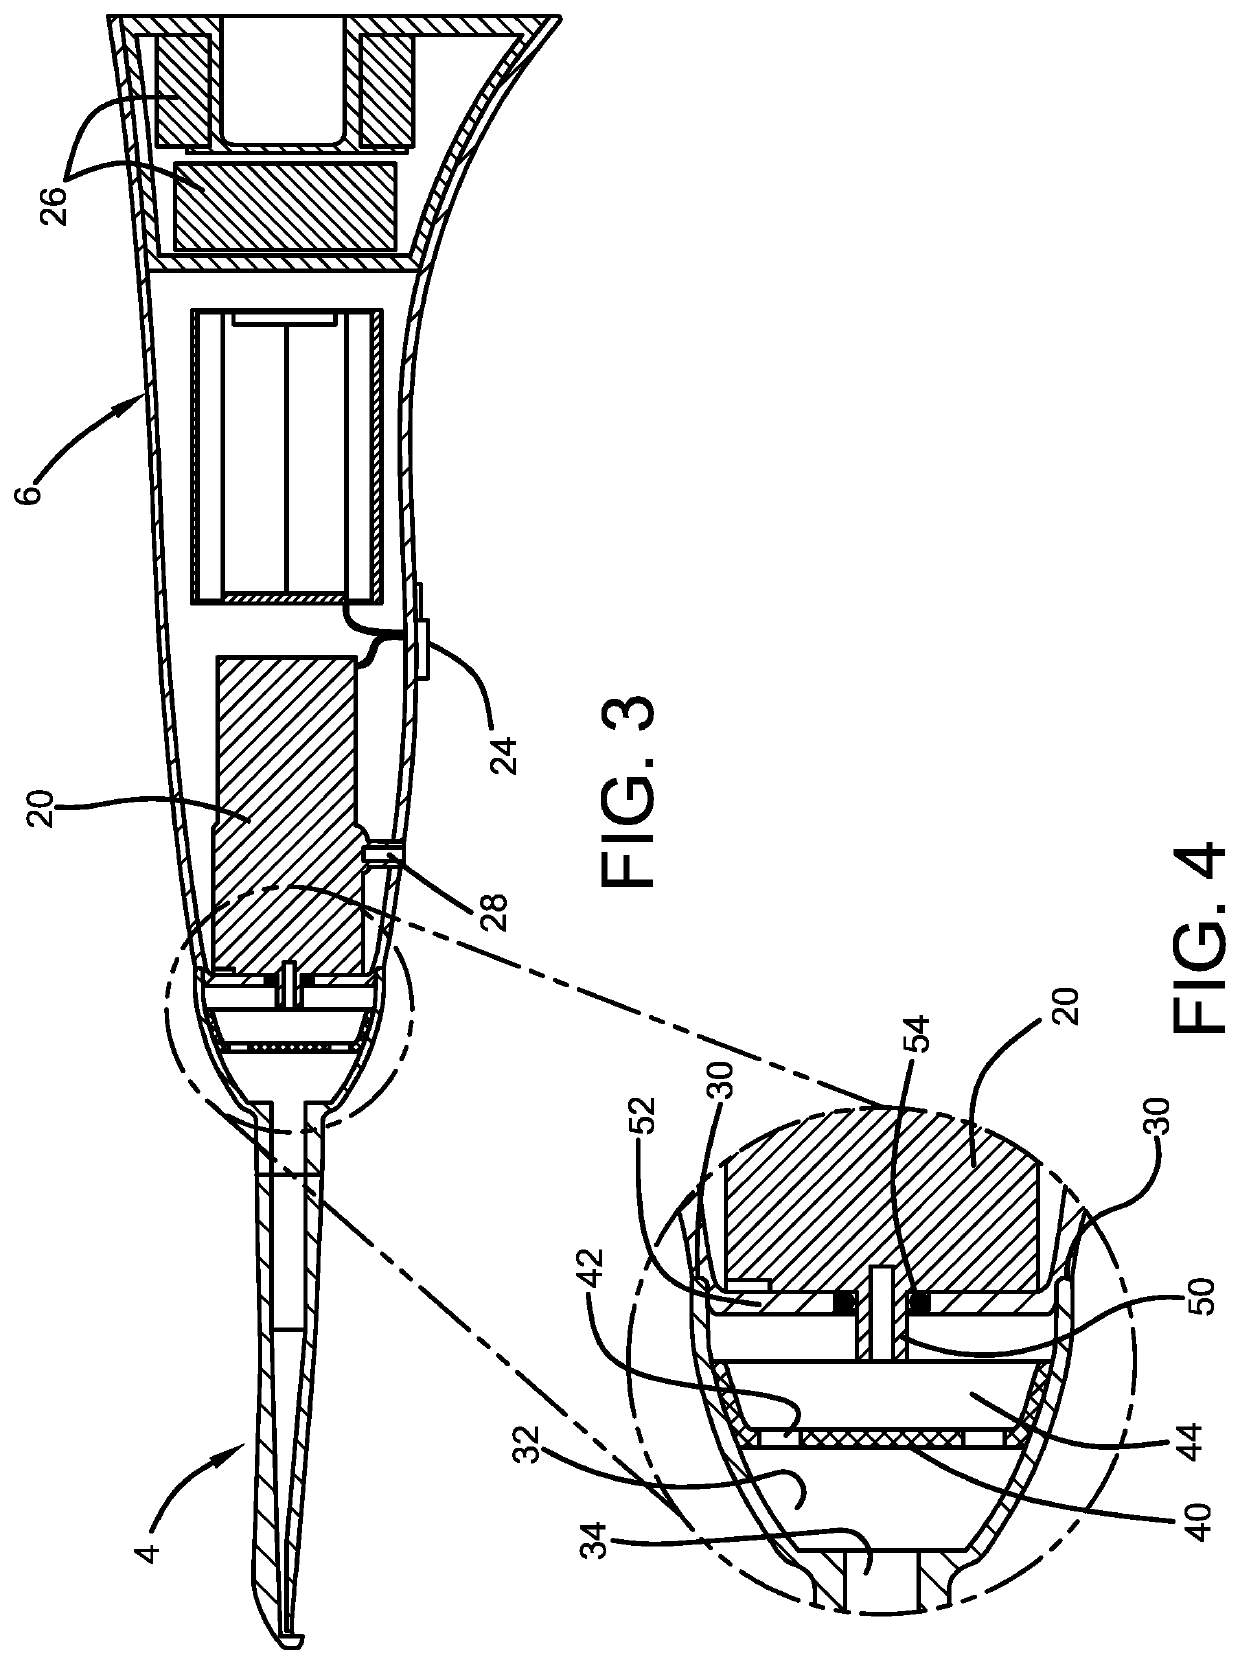 Portable vacuum-powered tongue cleaning device